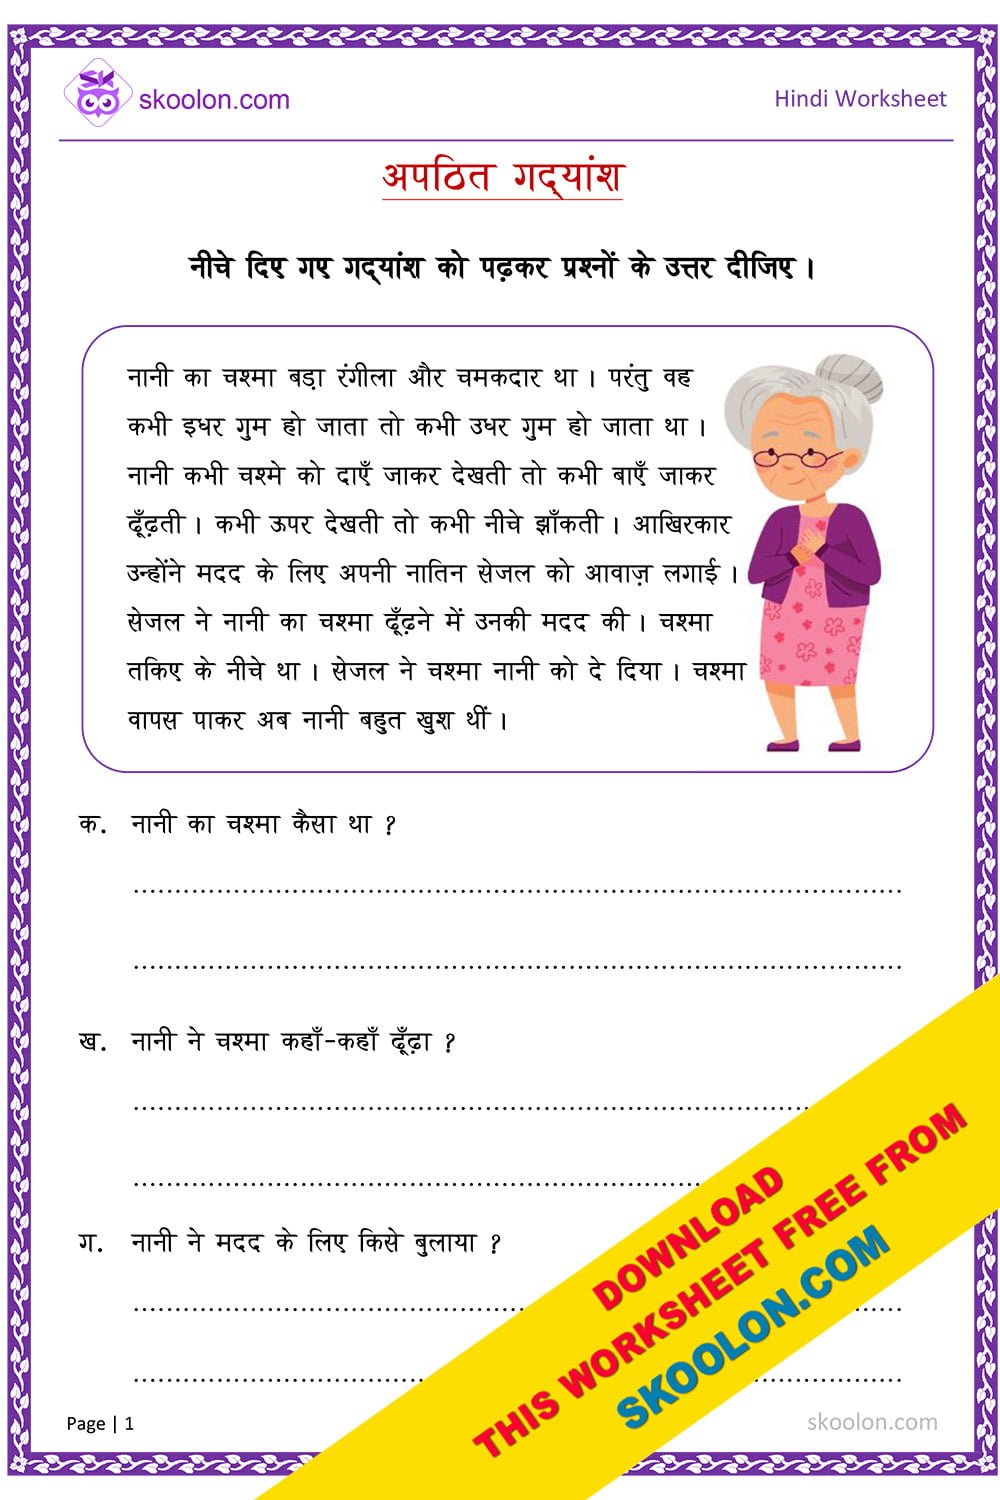 hindi-worksheet-for-class-2-archives-skoolon